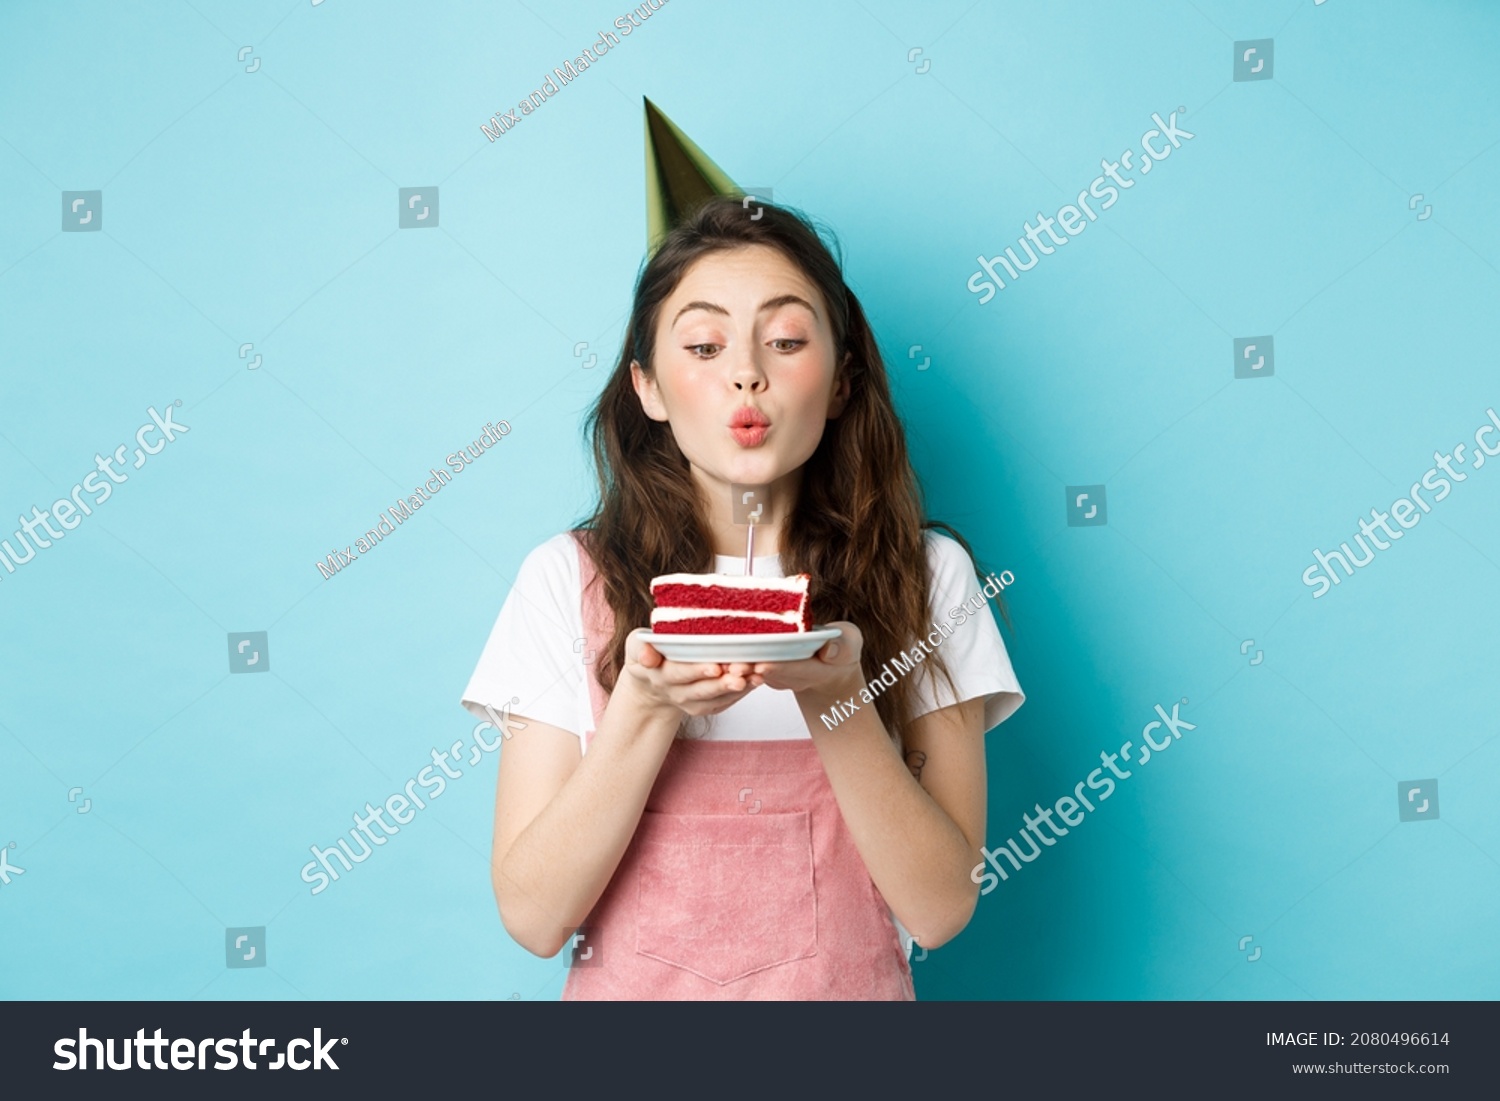 Holidays and celebration. Excited woman celebrating birthday, blowing candle on cake, wearing party cake and having fun, standing over blue background #2080496614